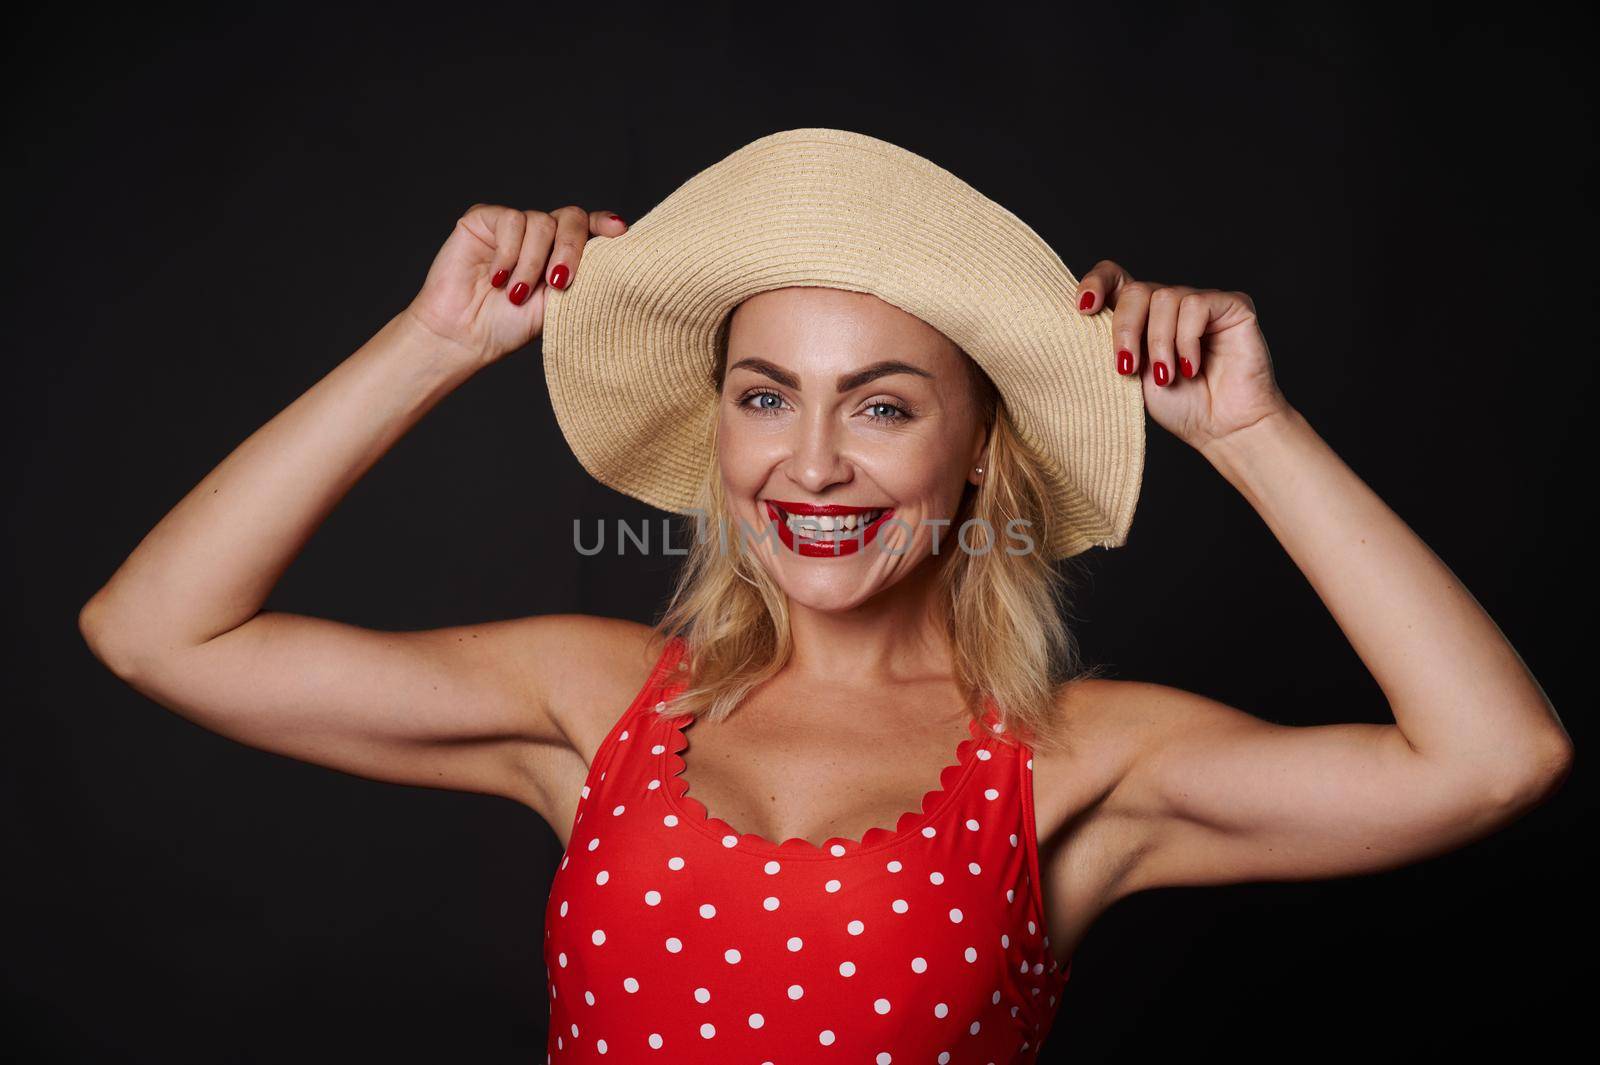 Attractive Caucasian blonde woman in a red swimsuit with white polka dots and a straw summer hat smiles a beautiful toothy smile, looking at the camera posing against black wall background. Copy space by artgf